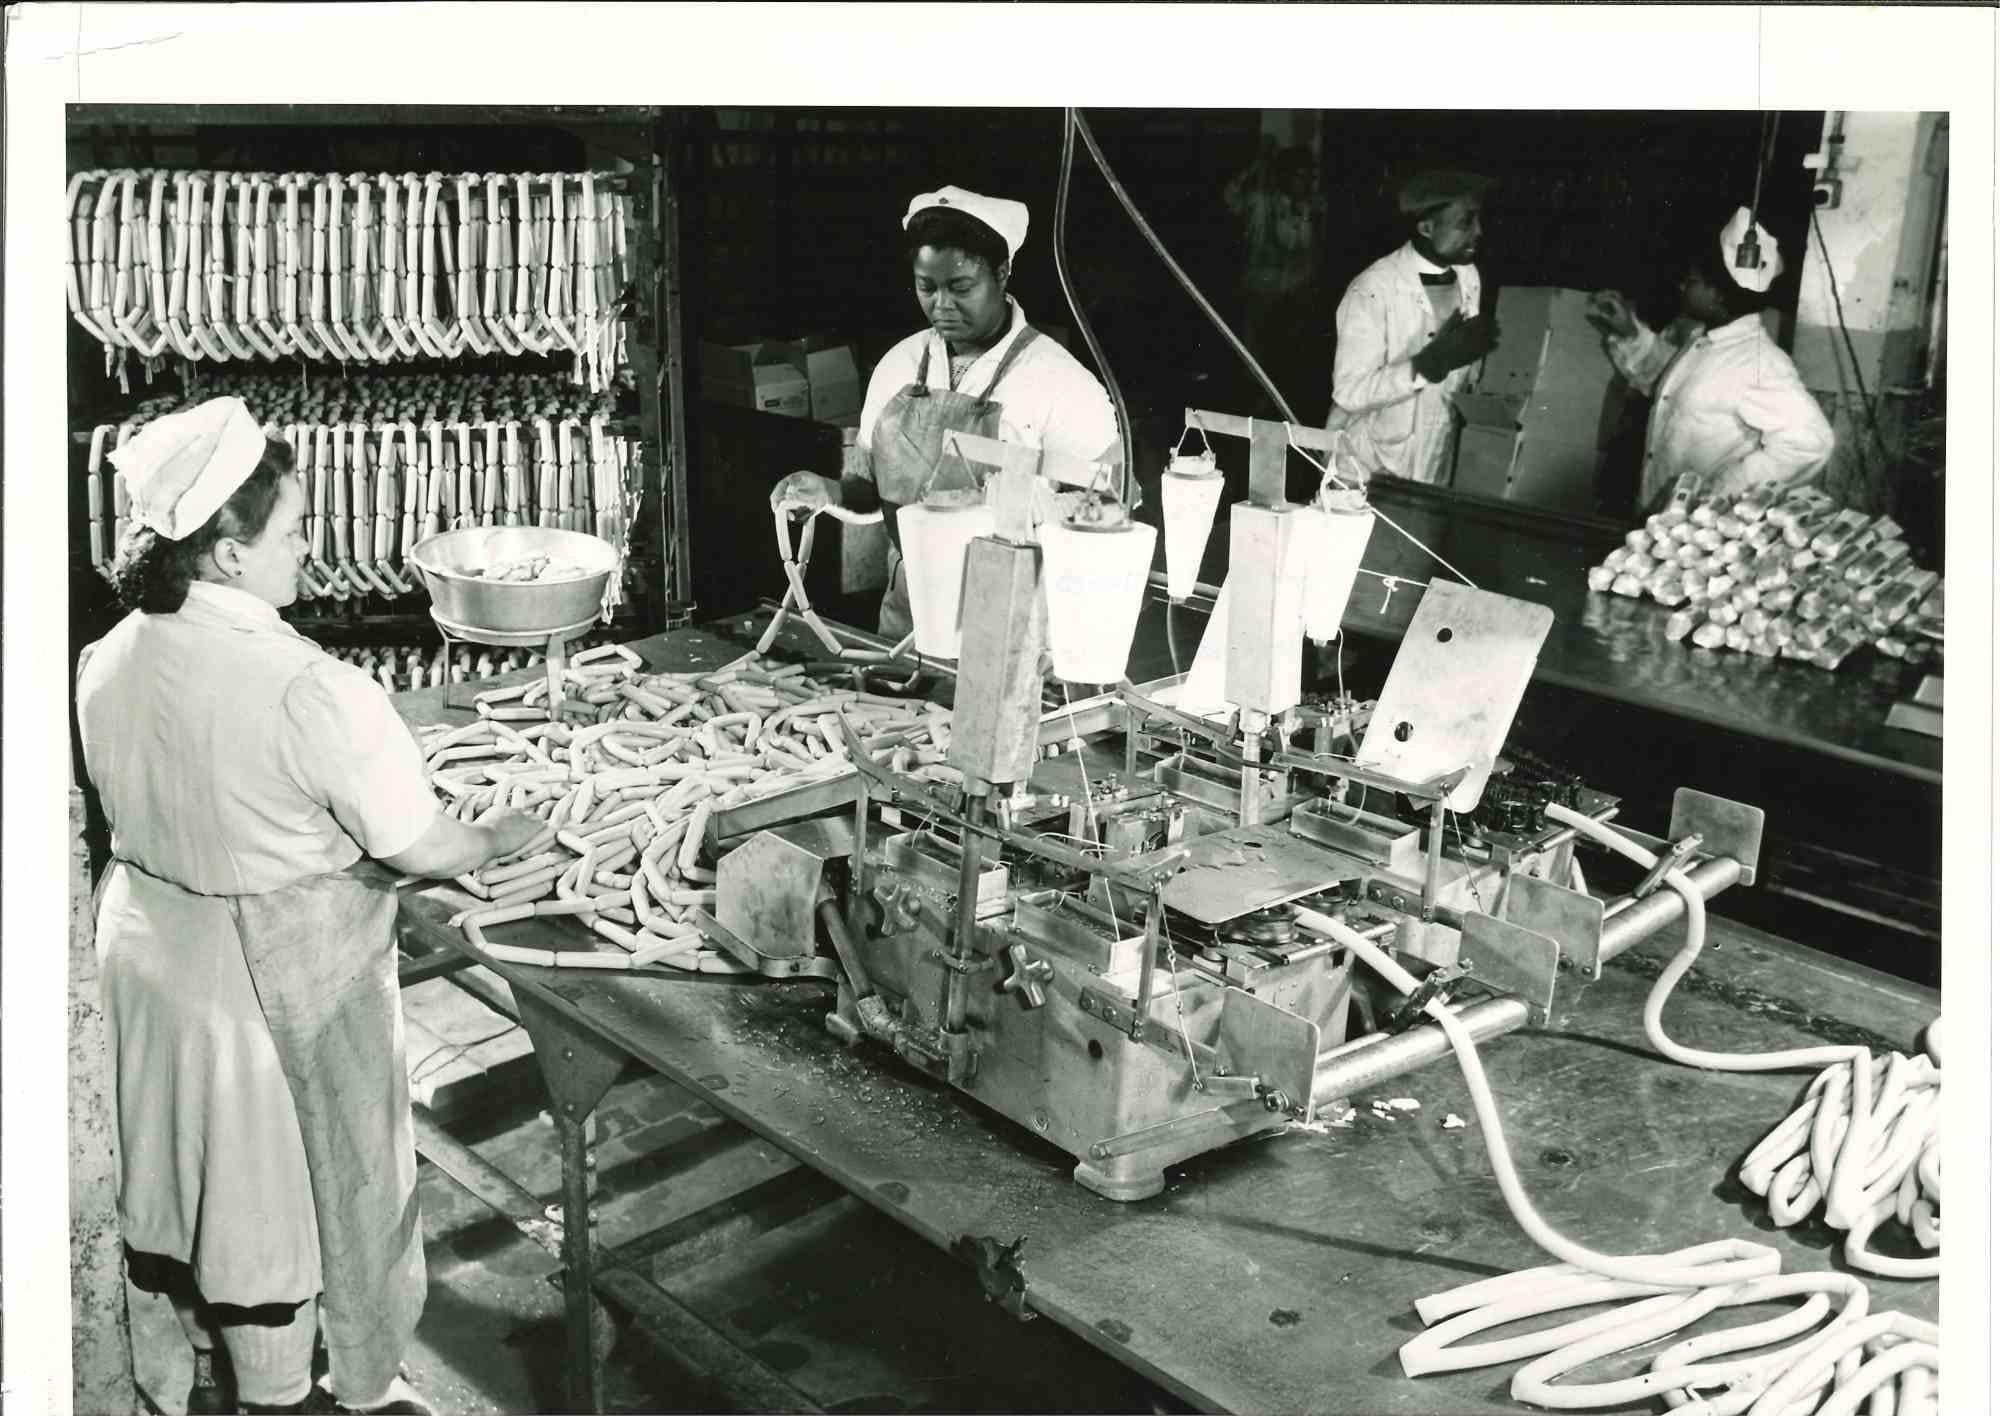 Unknown Figurative Photograph - Packing Industry - American Vintage Photograph - Mid 20th Century